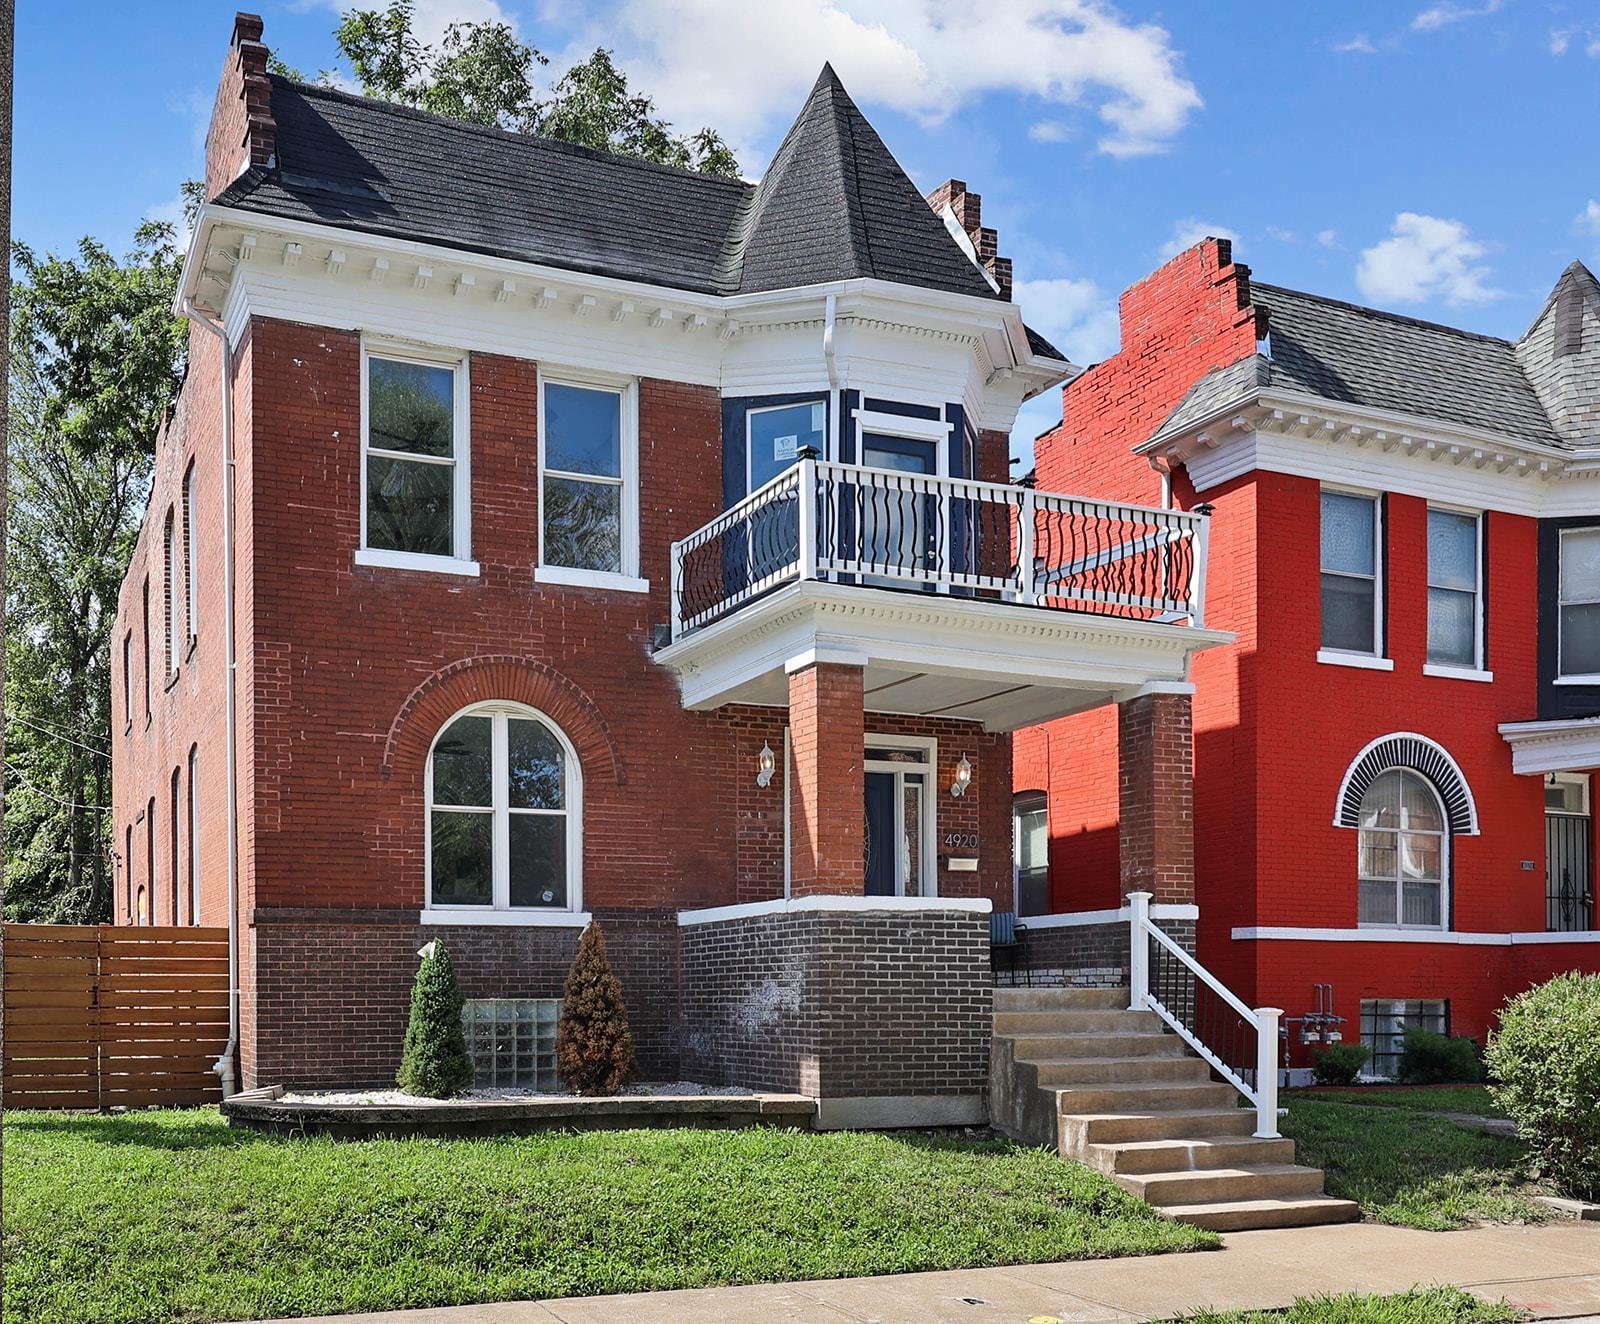 4920 Maple Ave St. Louis, MO 63113